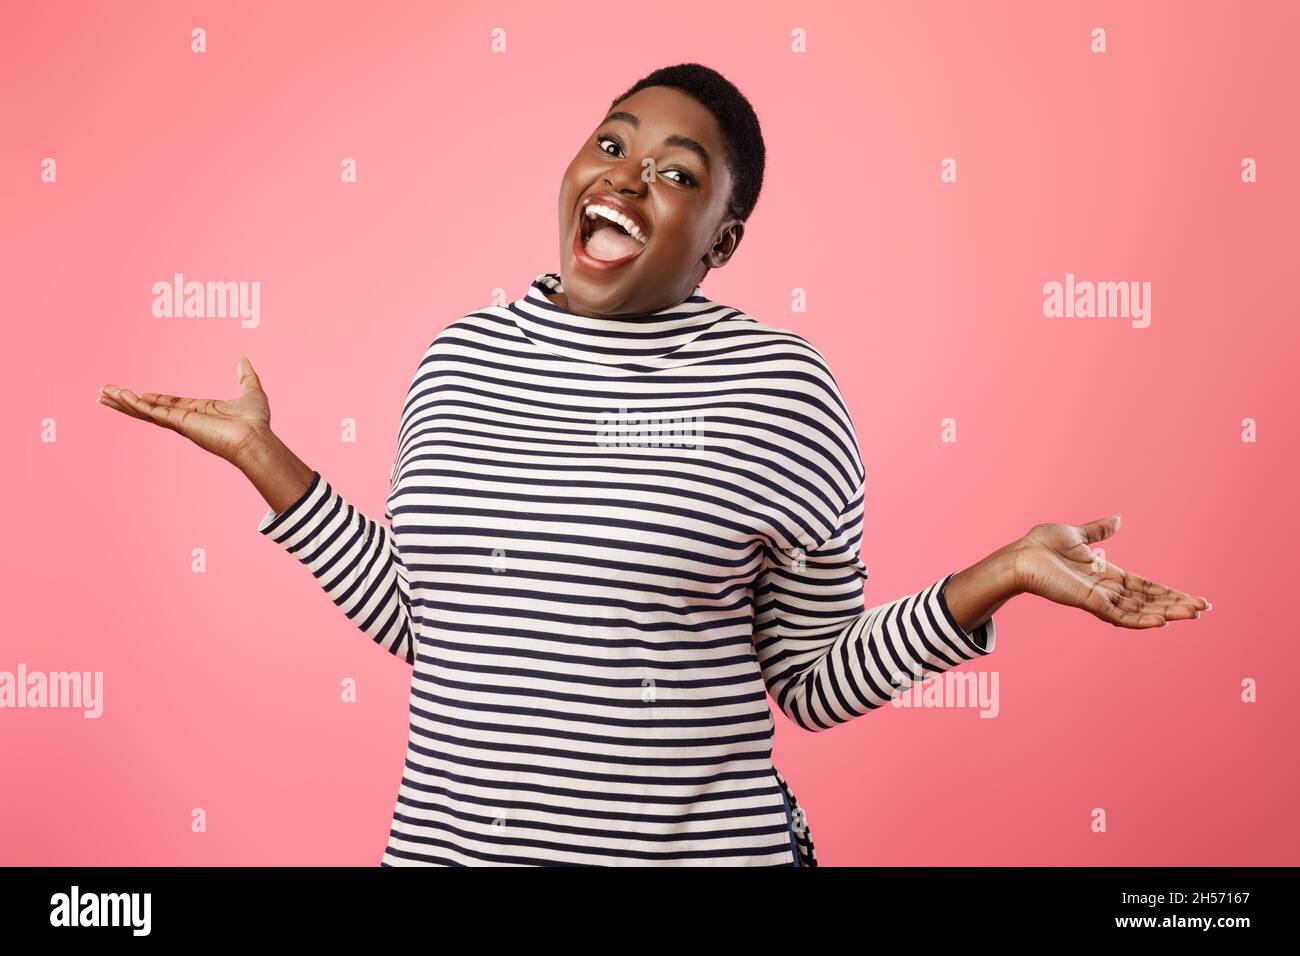 Cheerful Plump African American Lady Shrugging Shoulders Over Pink Background Stock Photo